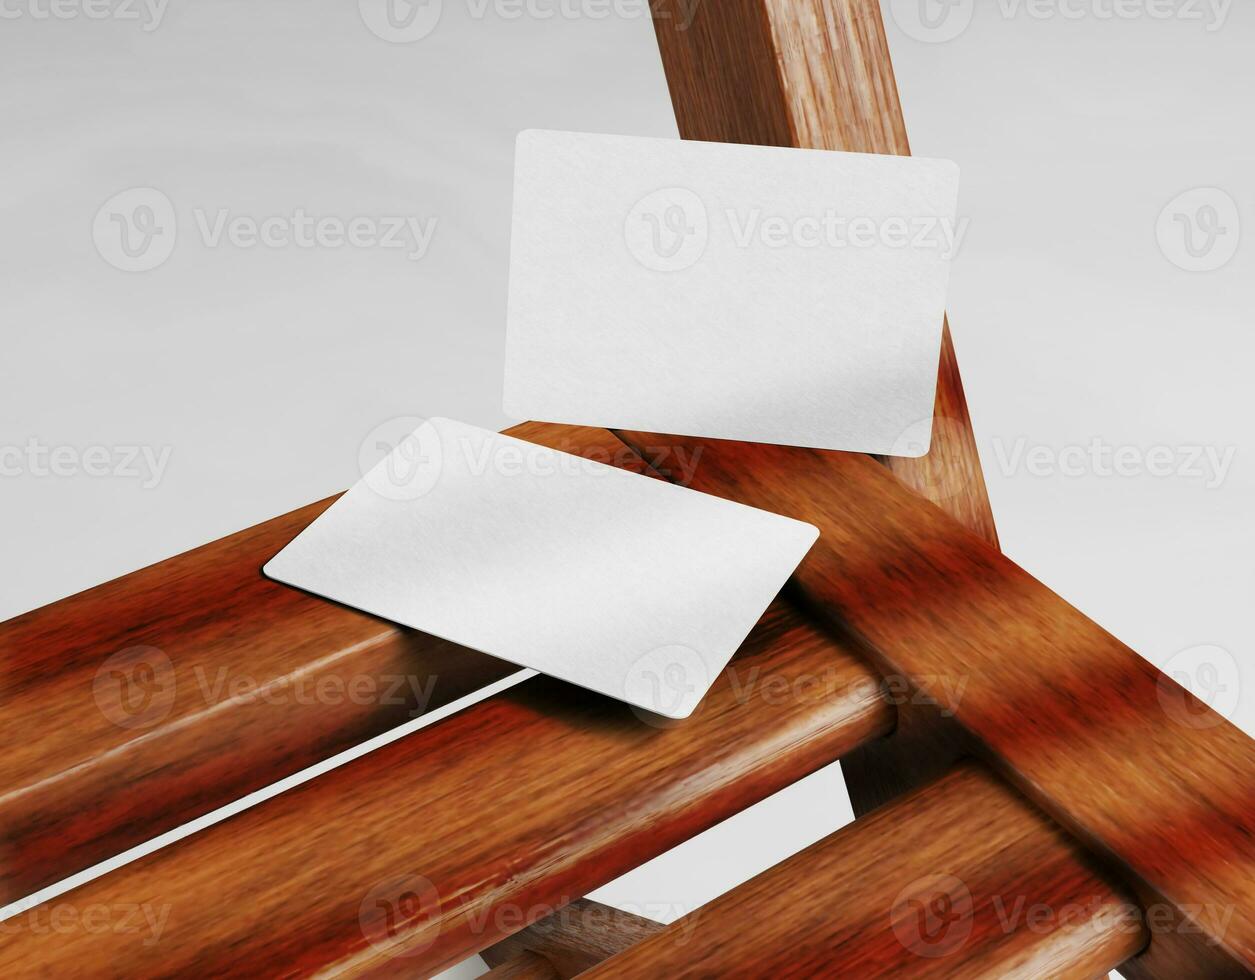 Business card preview on wooden table 2 photo